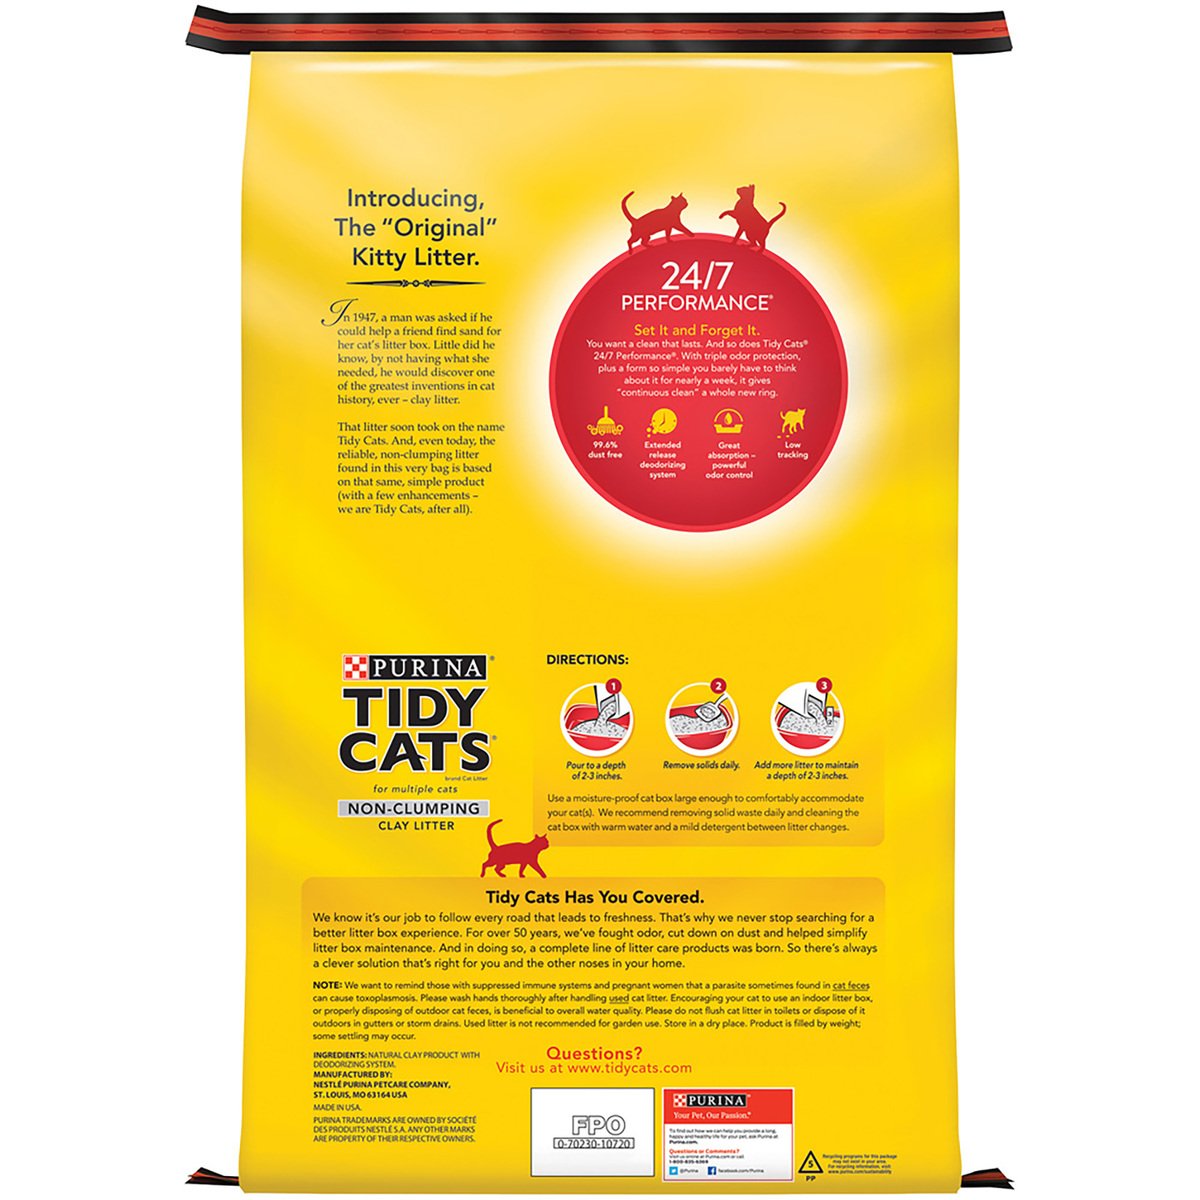 Purina Tidy Cats 24/7 Performance Non-Clumping Cat Litter 9.07kg